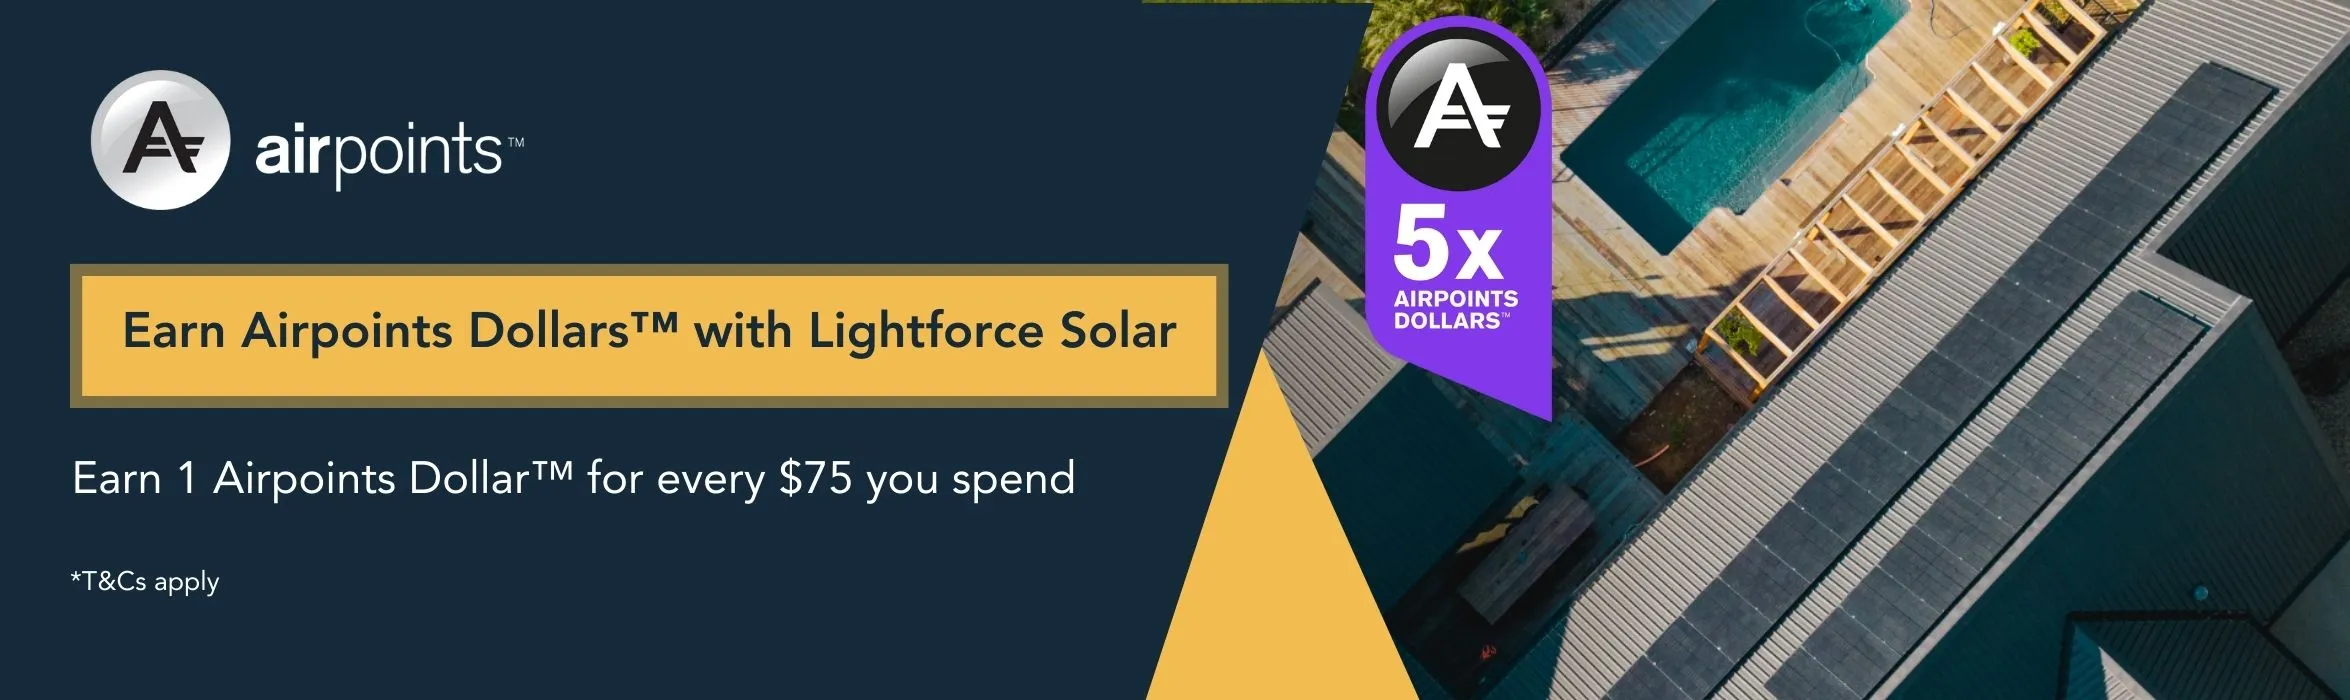 earn-and-spend-airpoints-with-lightforce-solar-mob